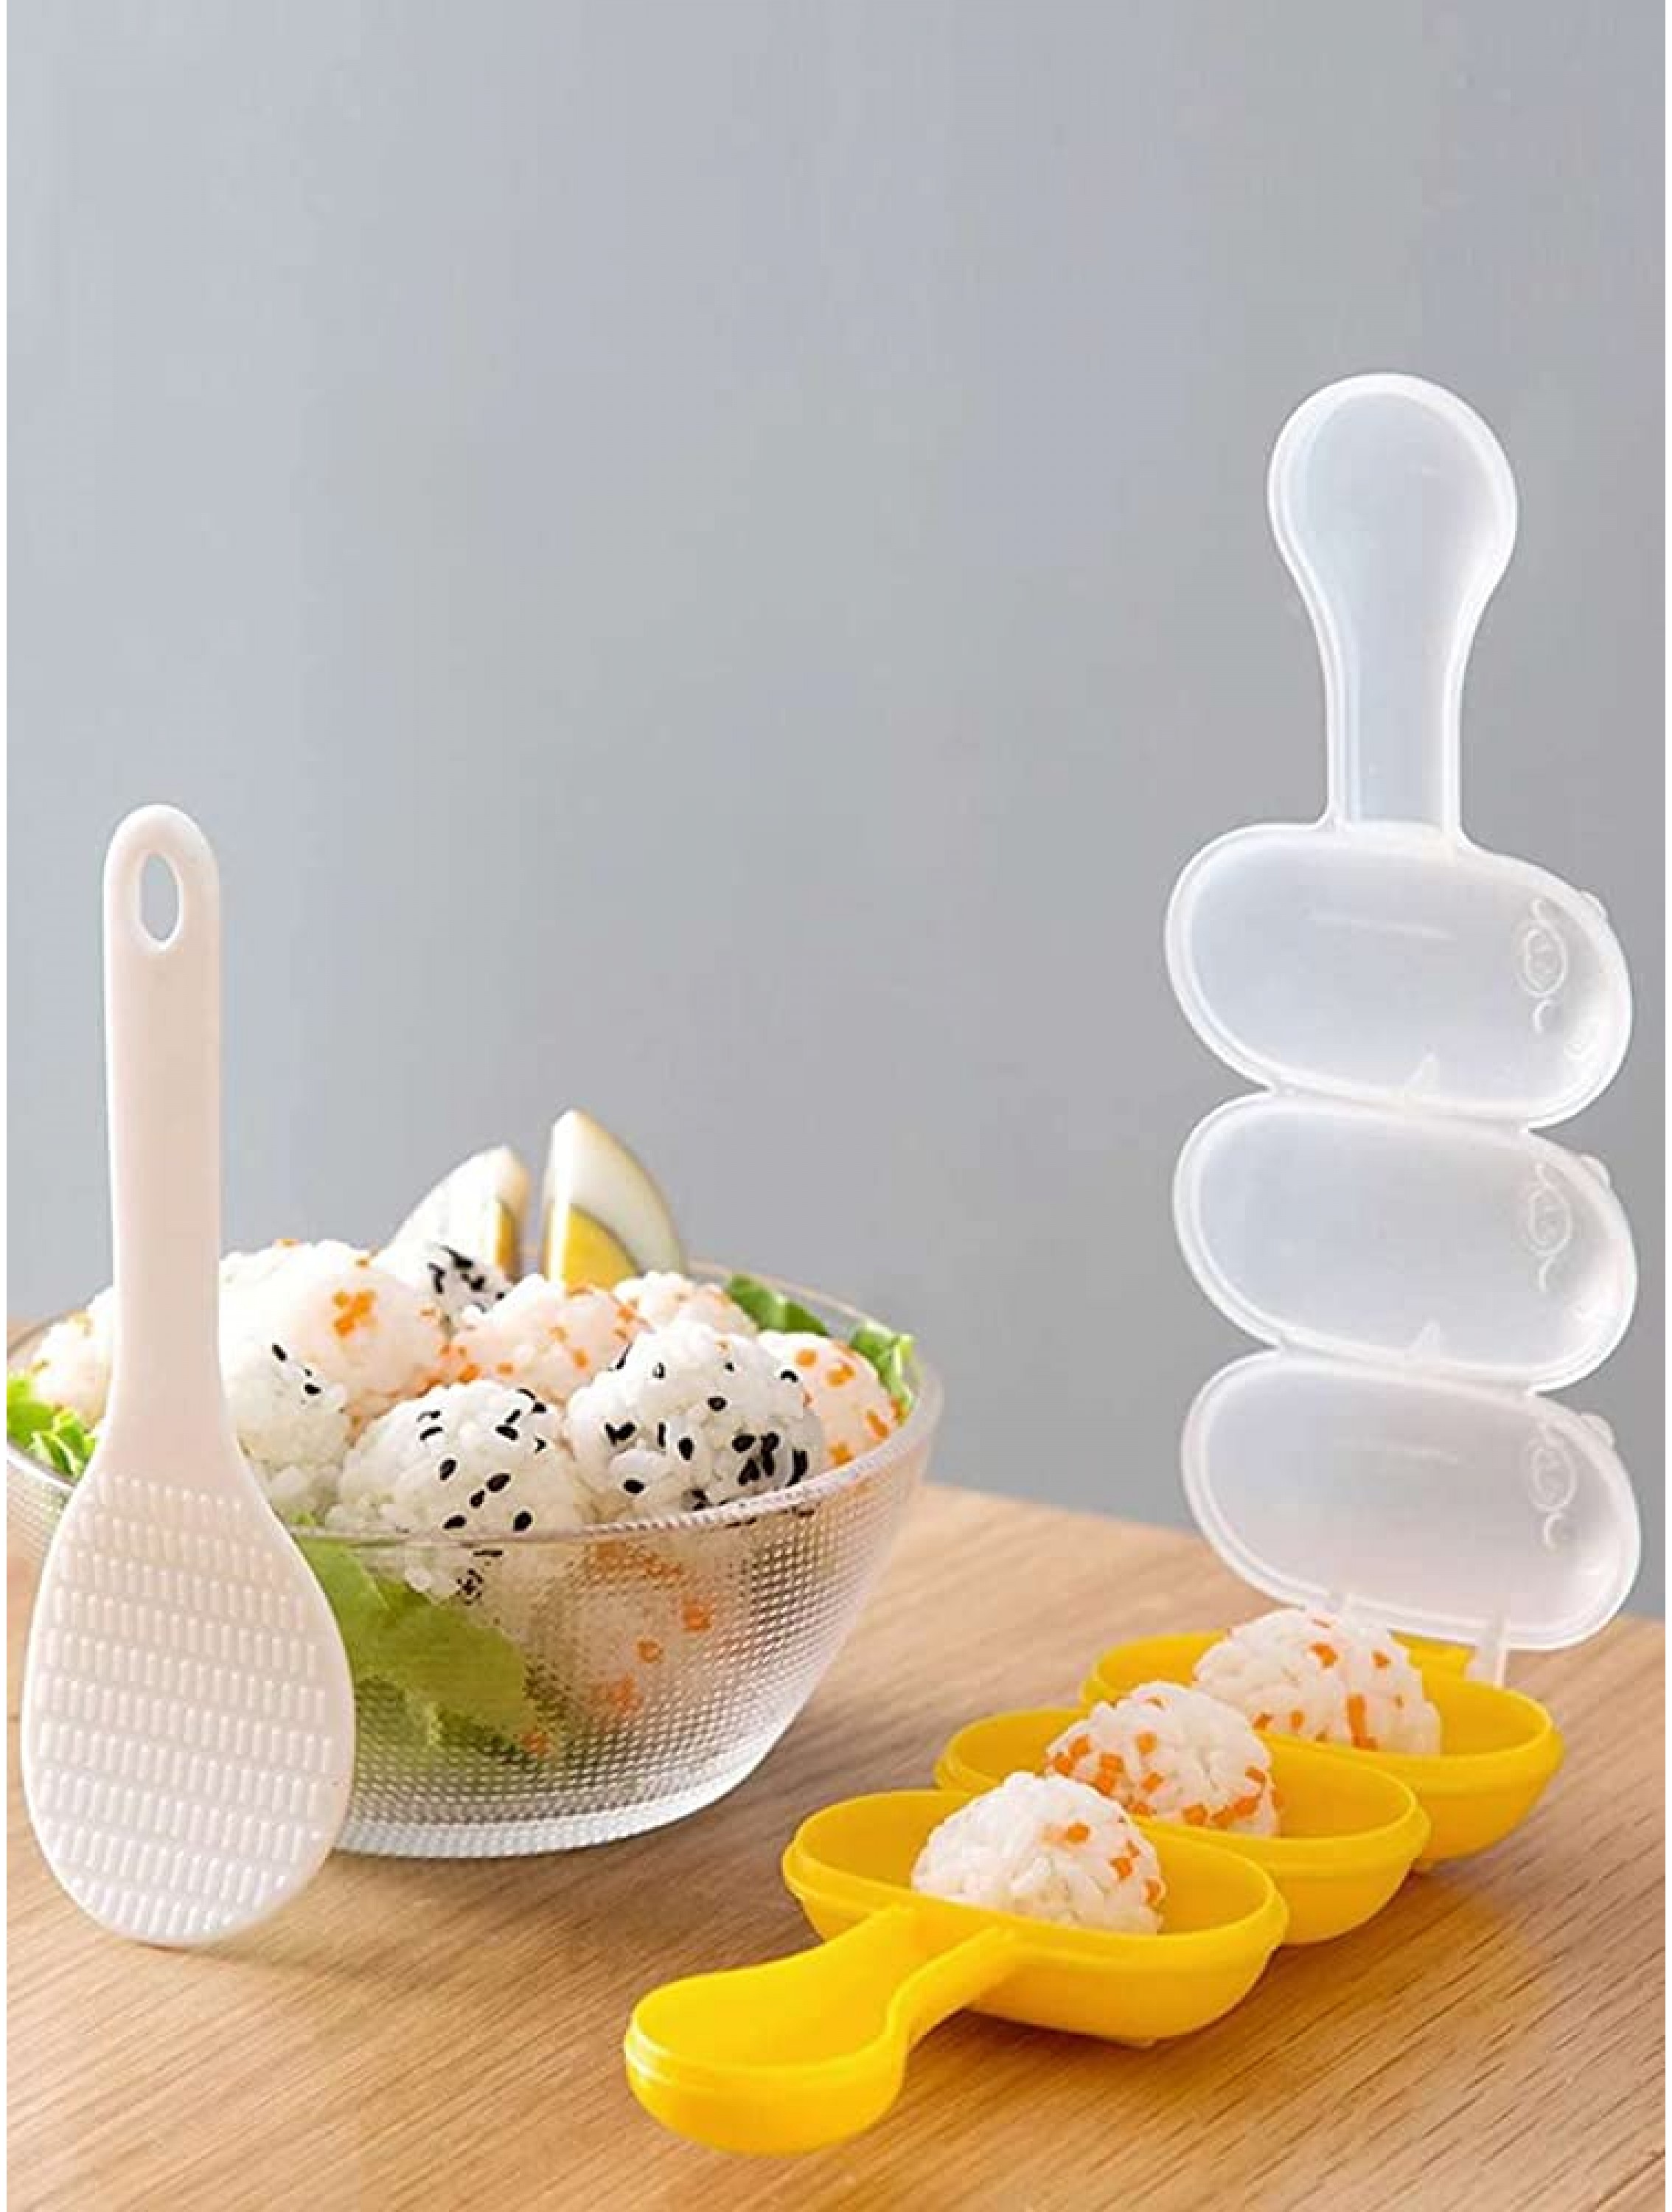 Z-Chen Kitchen tools 1pc Rice Ball Mold Color : Yellow Size : One-size - B64AOHWFX